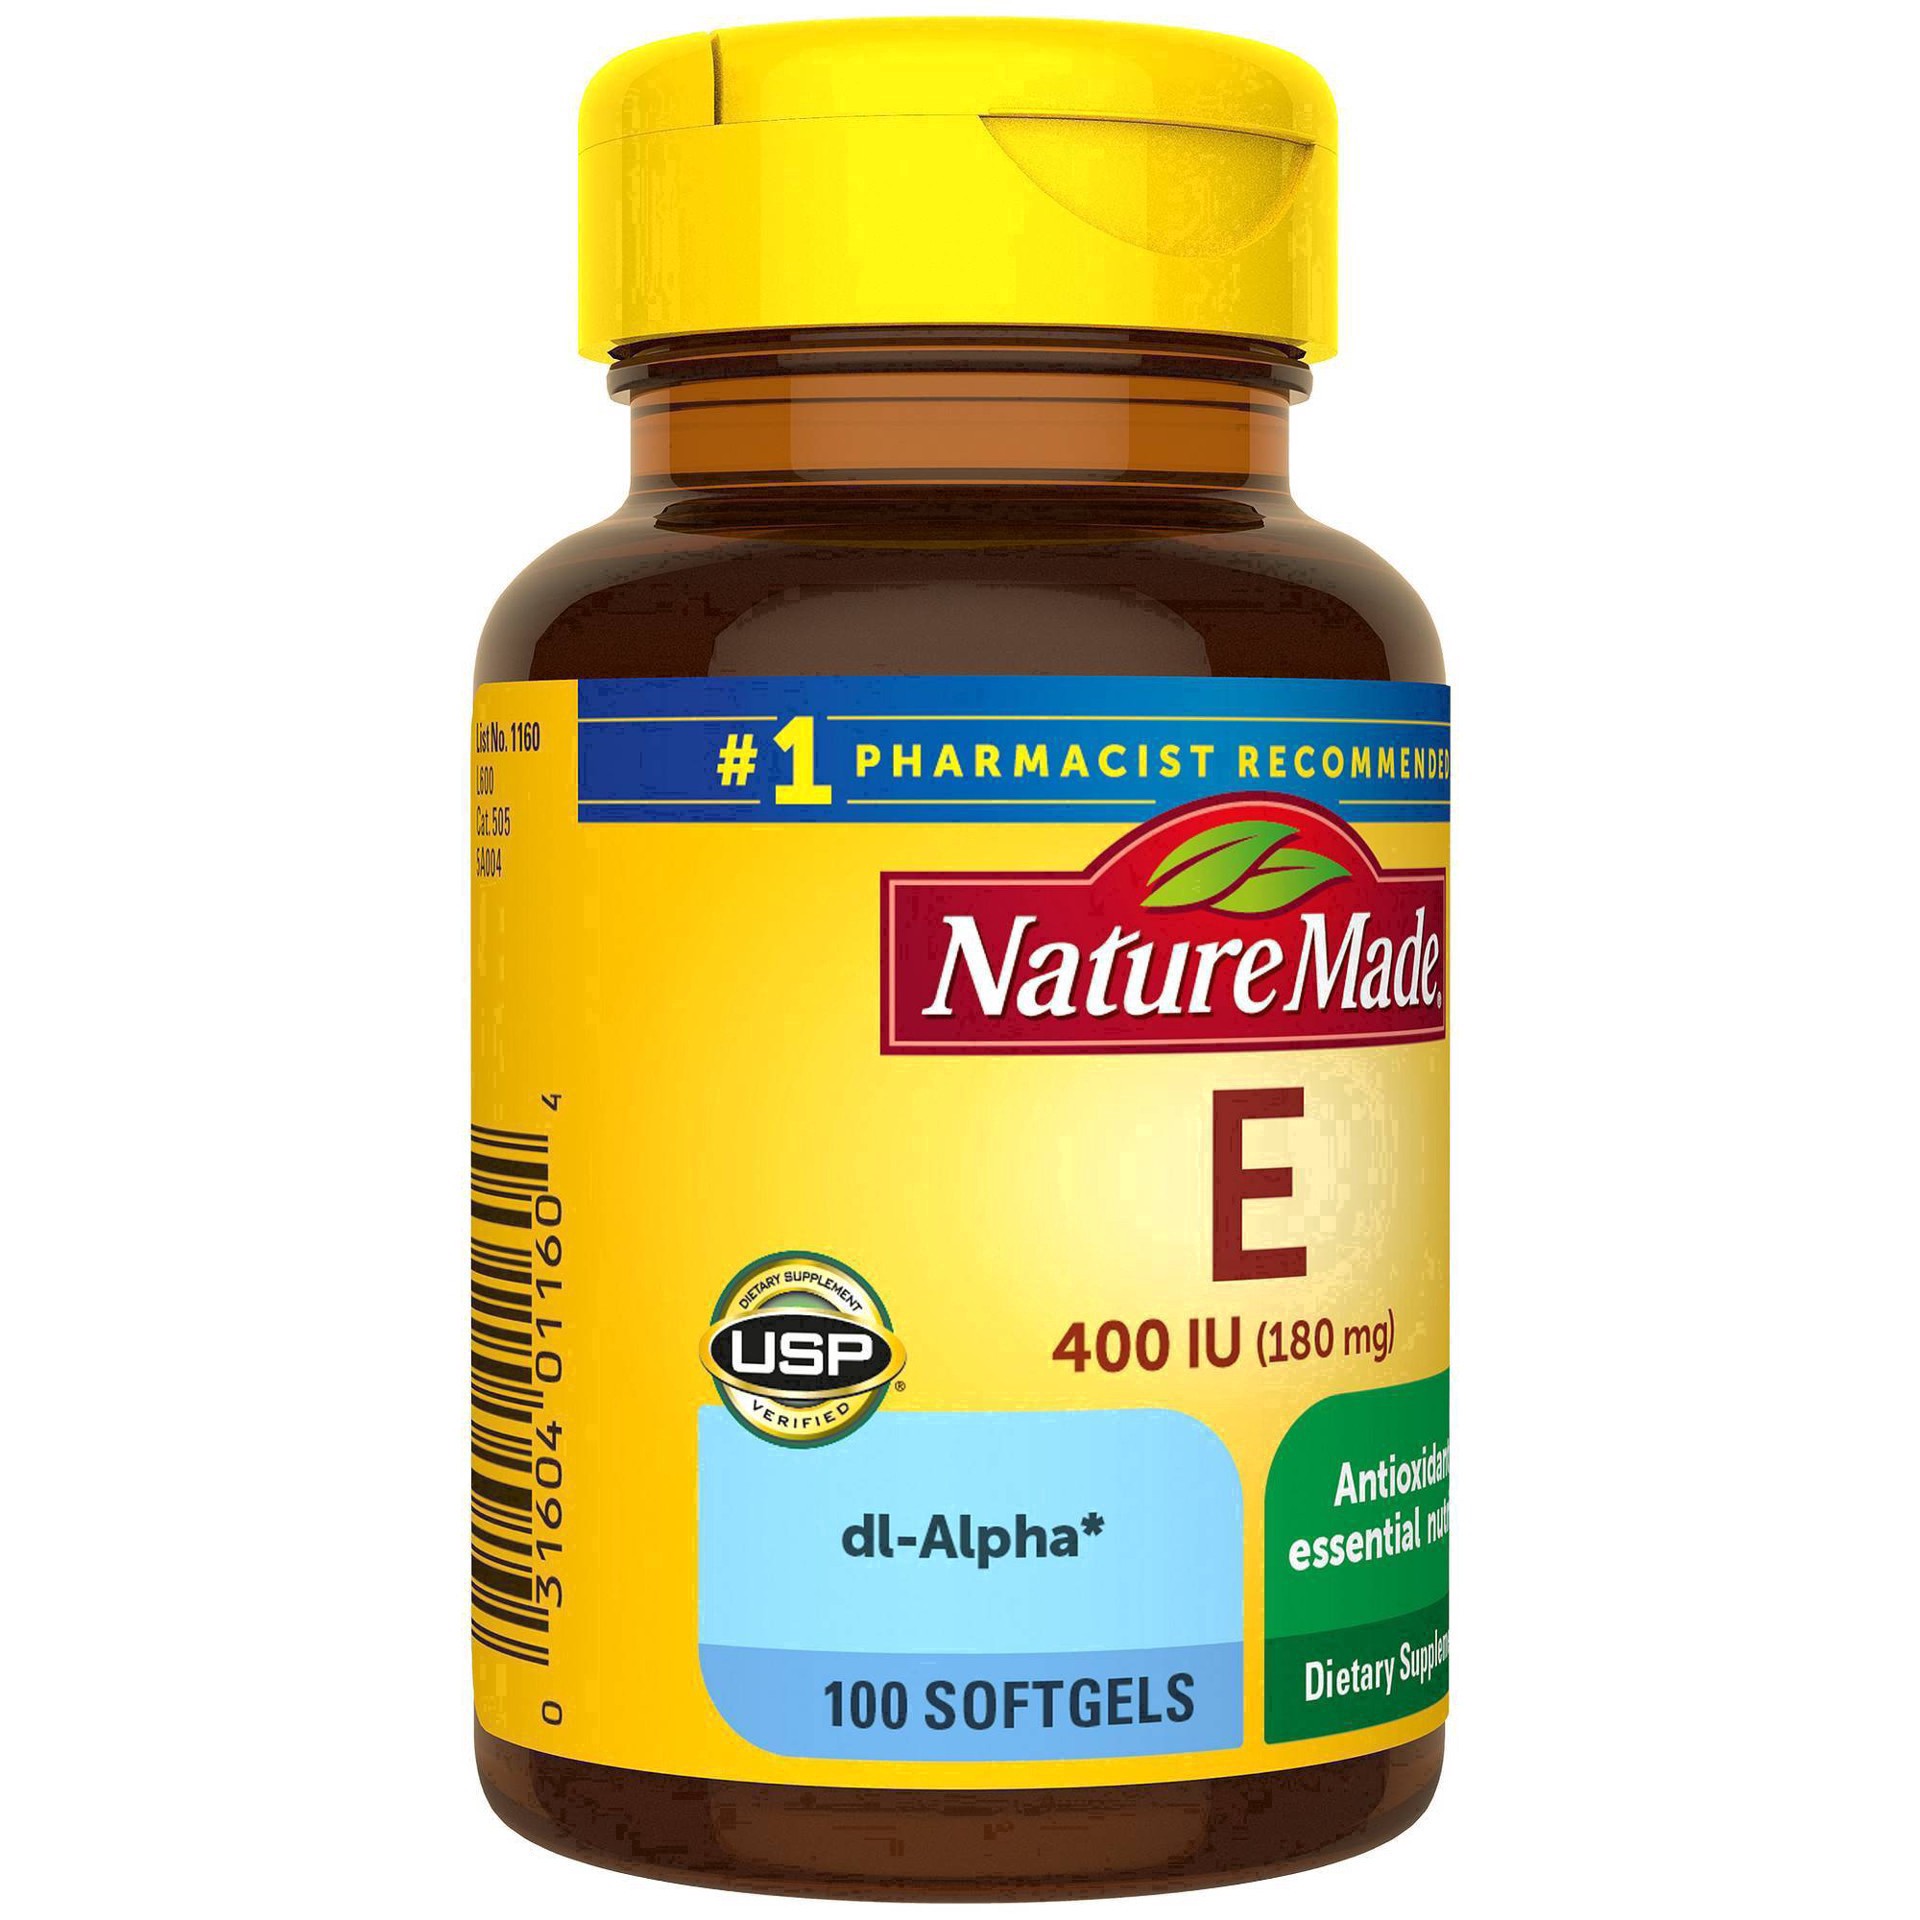 slide 54 of 74, Nature Made Vitamin E 180 mg (400 IU) dl-Alpha, Dietary Supplement for Antioxidant Support, 100 Softgels, 100 Day Supply, 100 ct